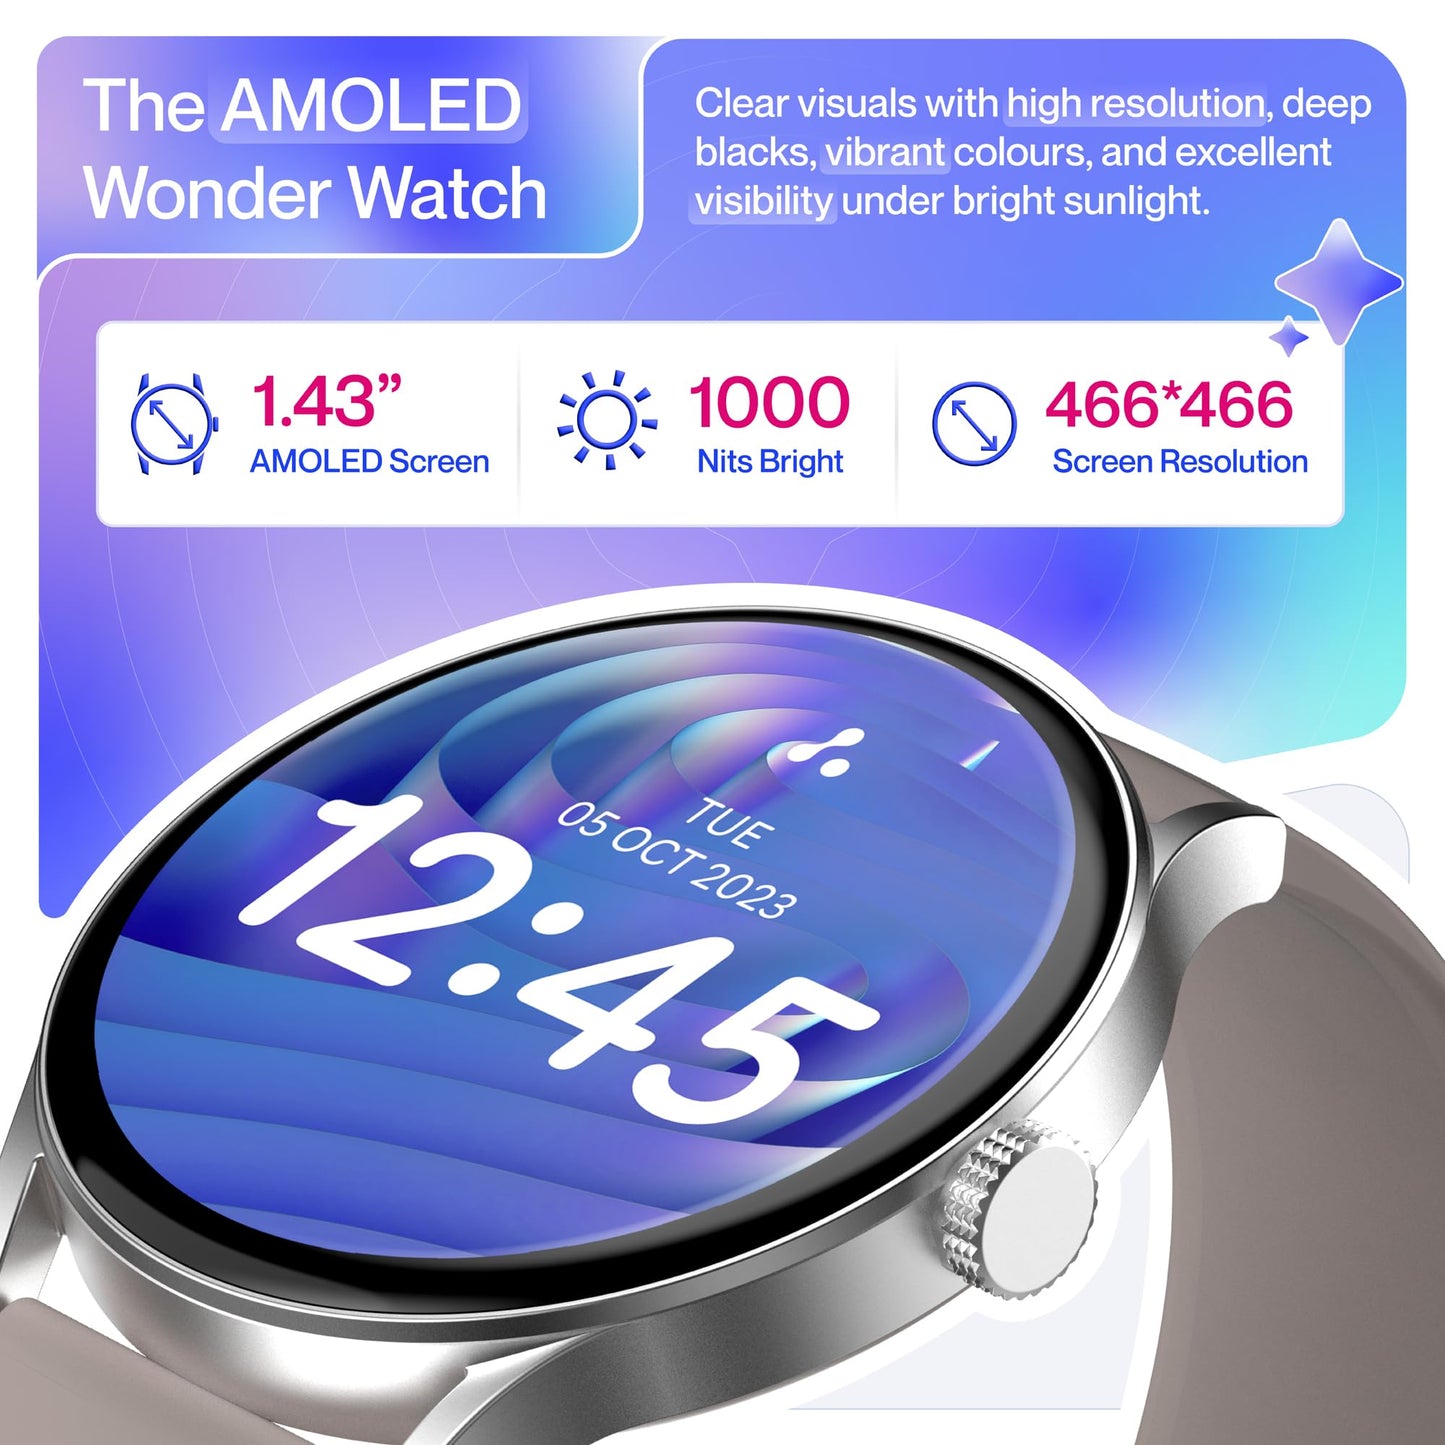 Ambrane 1.43" AMOLED Display, Bluetooth Calling SmartWatch, 1000 NITS Brightness, Functional Crown, 60Hz Refresh Rate, 100+ Sports Mode with IP68, 100+ Watch Faces (Marble, Brown)